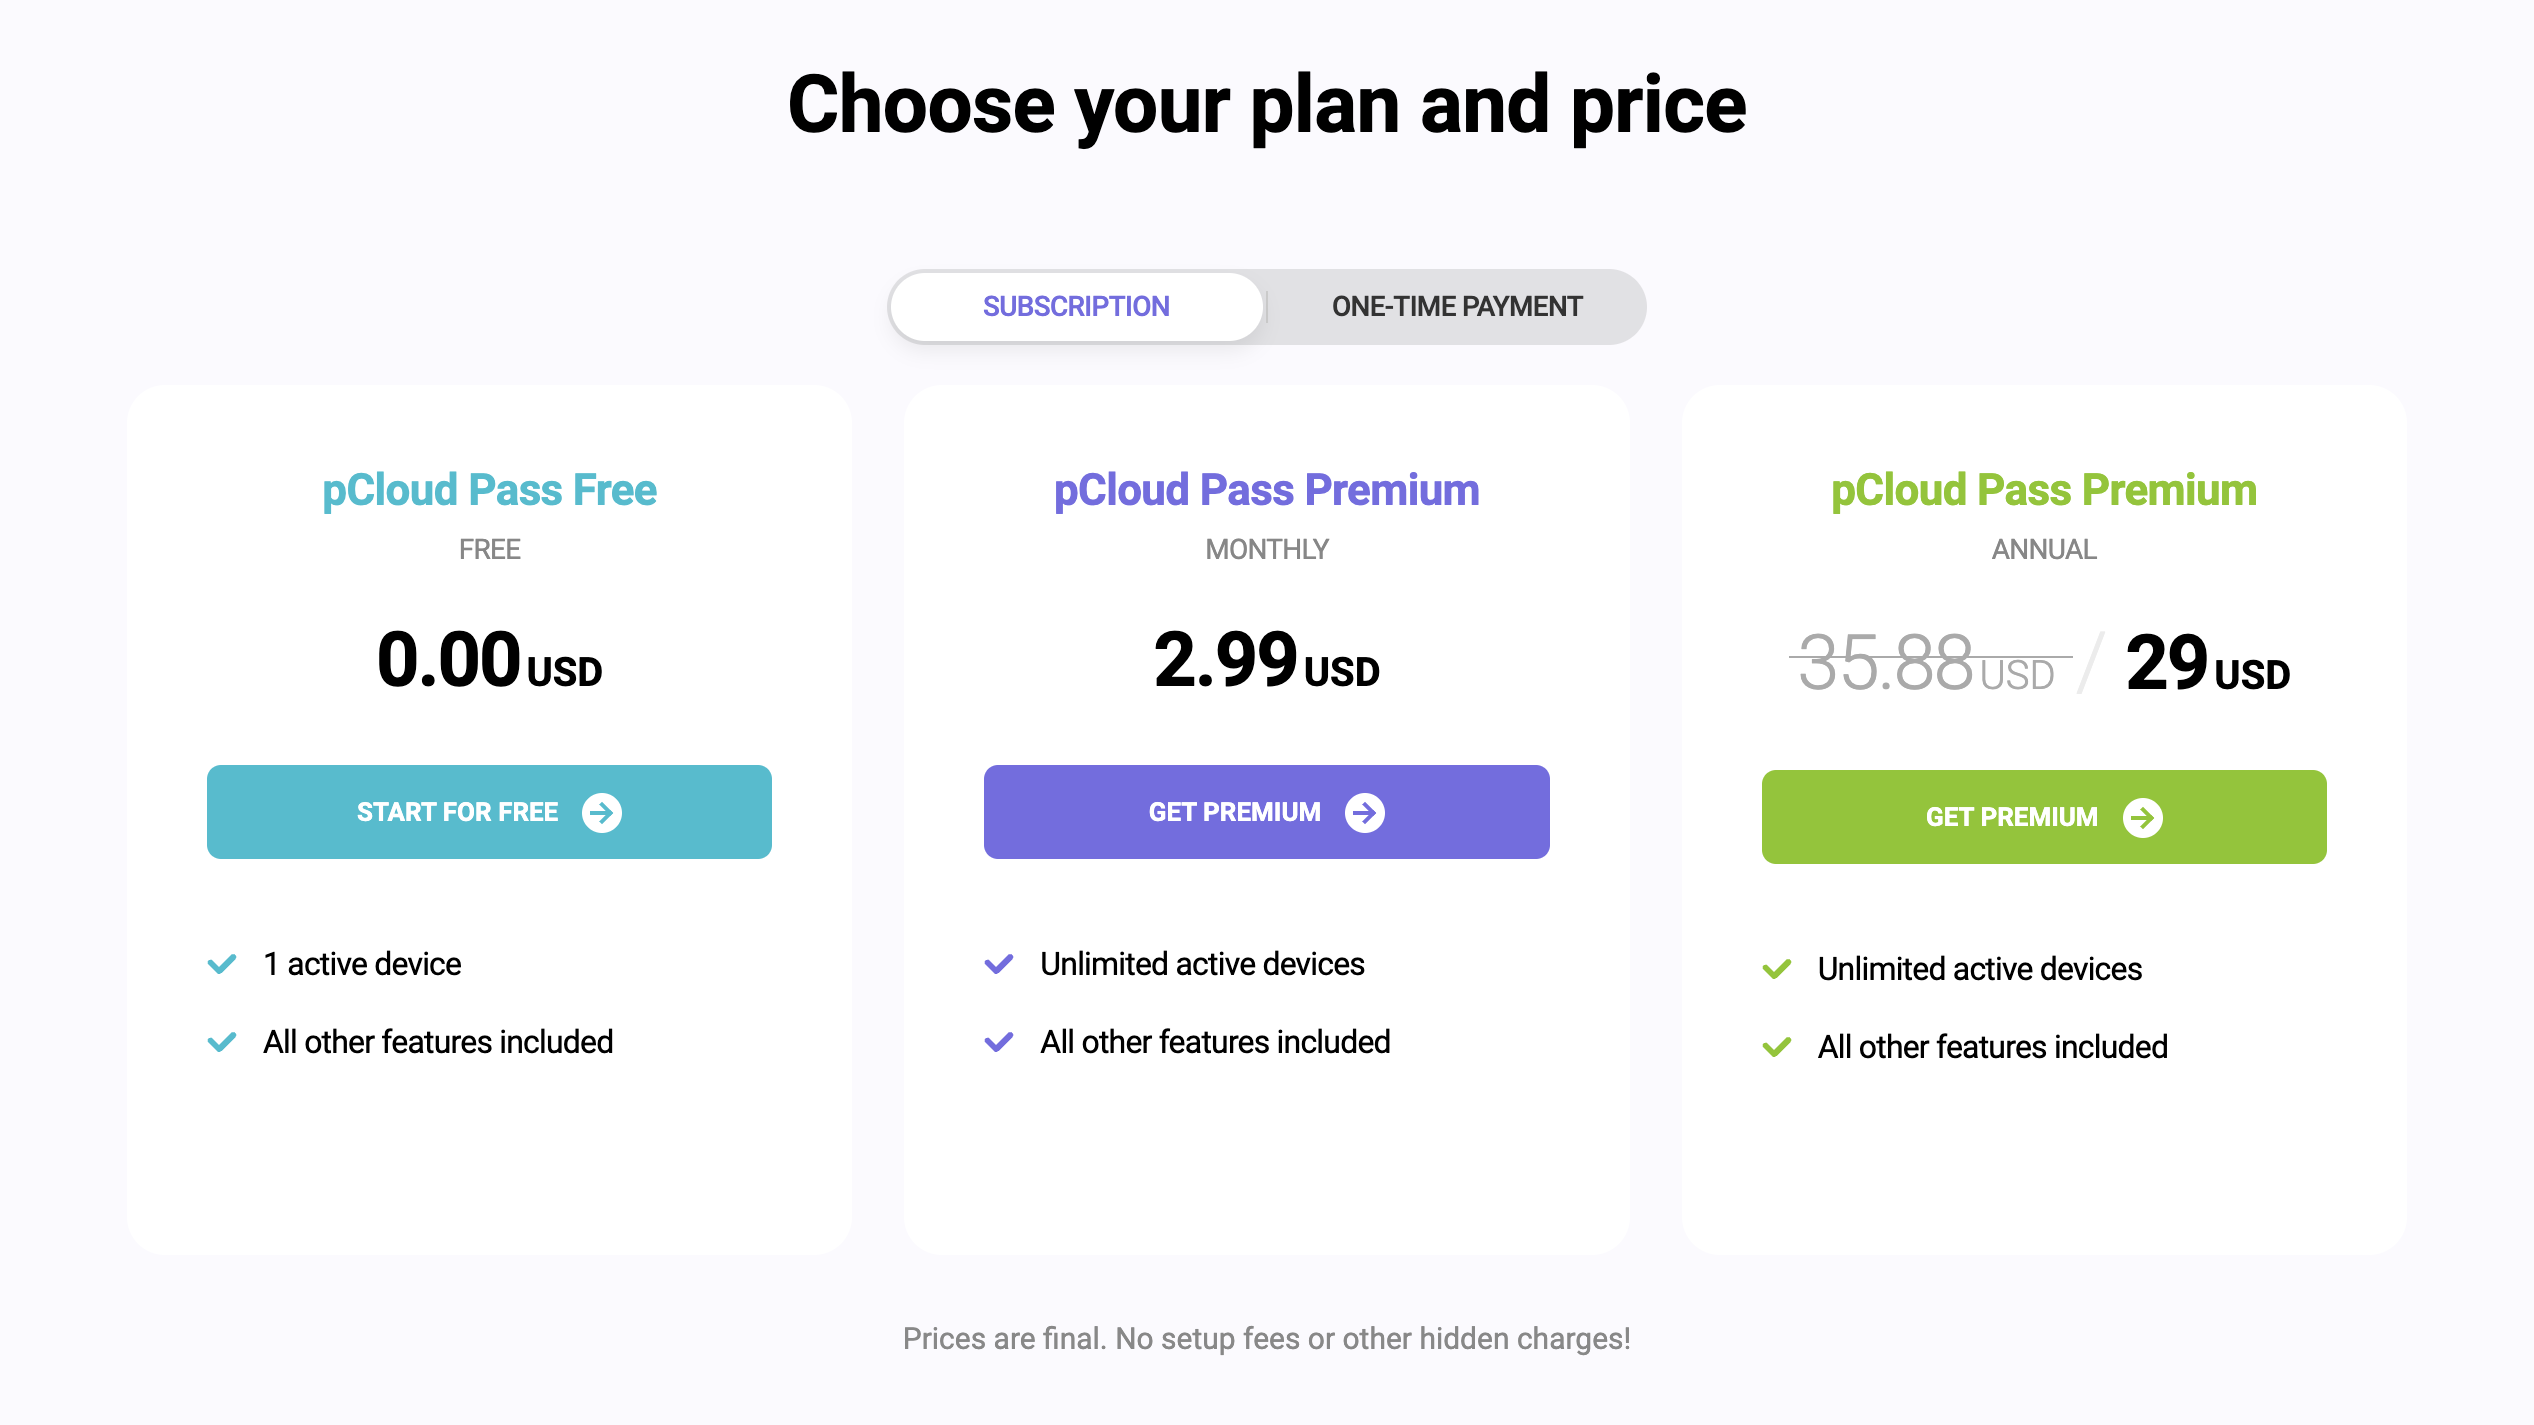 pCloud Pass prices January 2023